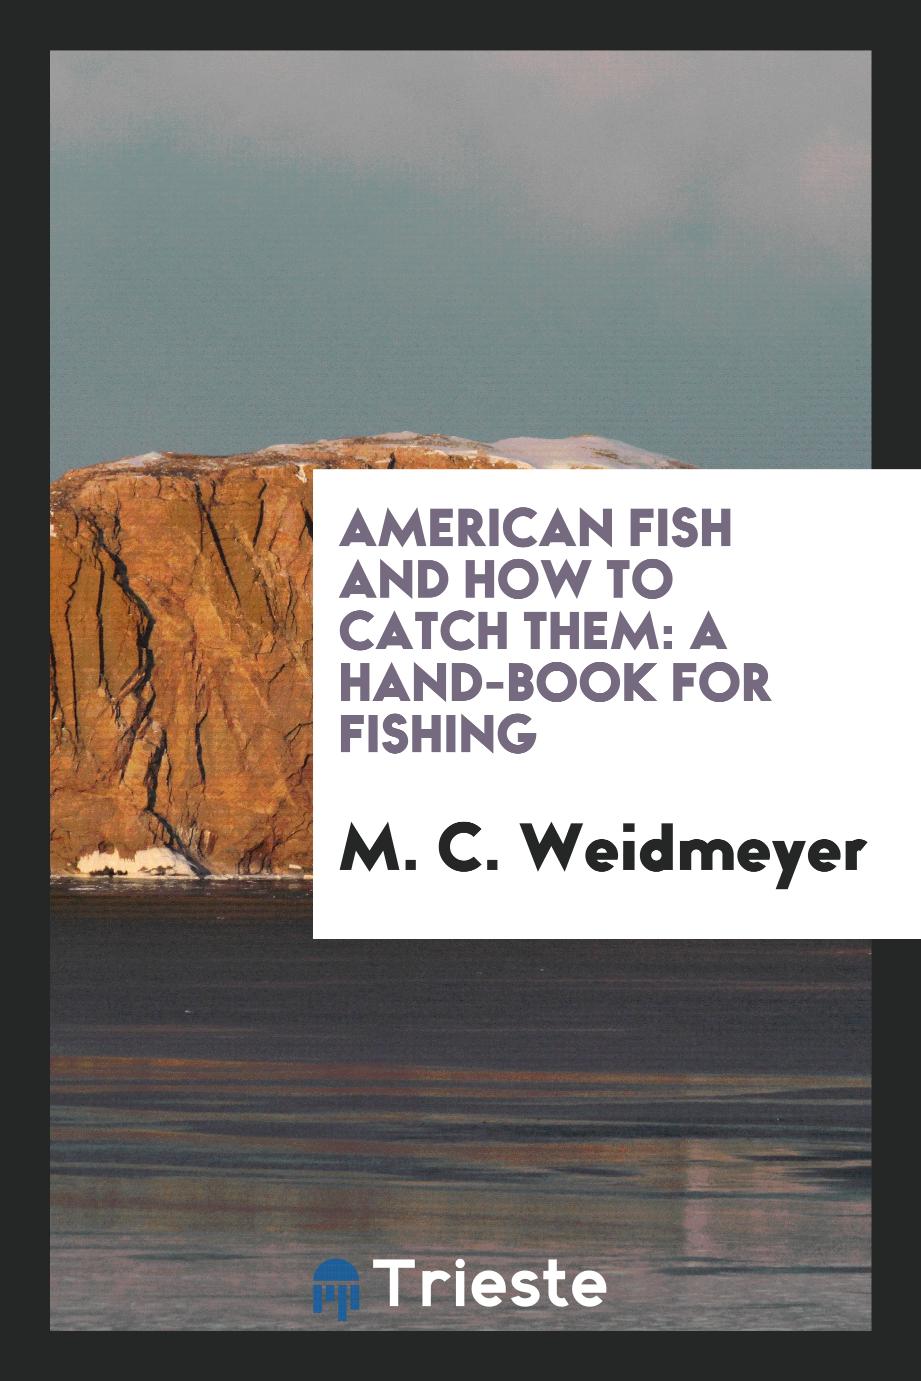 American Fish and how to Catch Them: A Hand-Book for Fishing